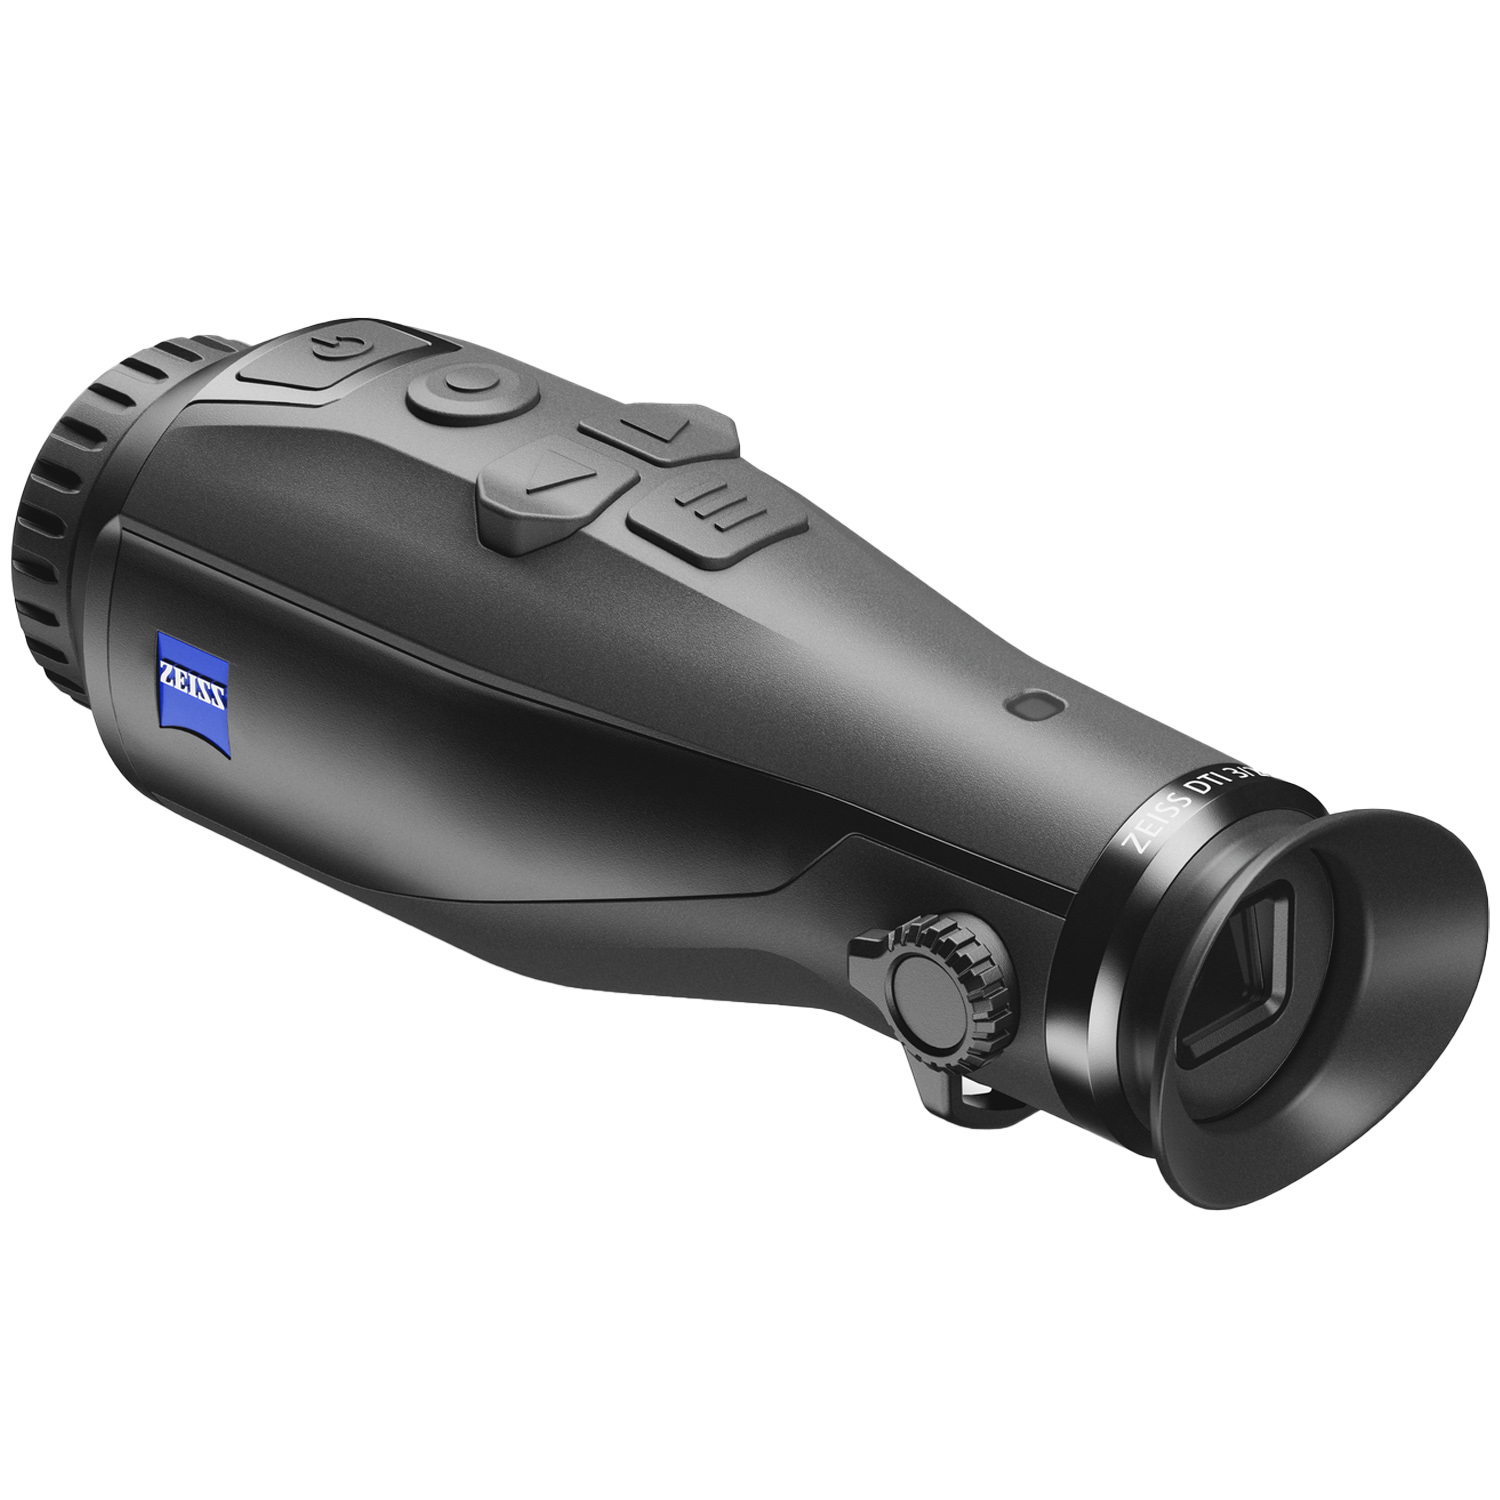 Zeiss thermal hunting spotter